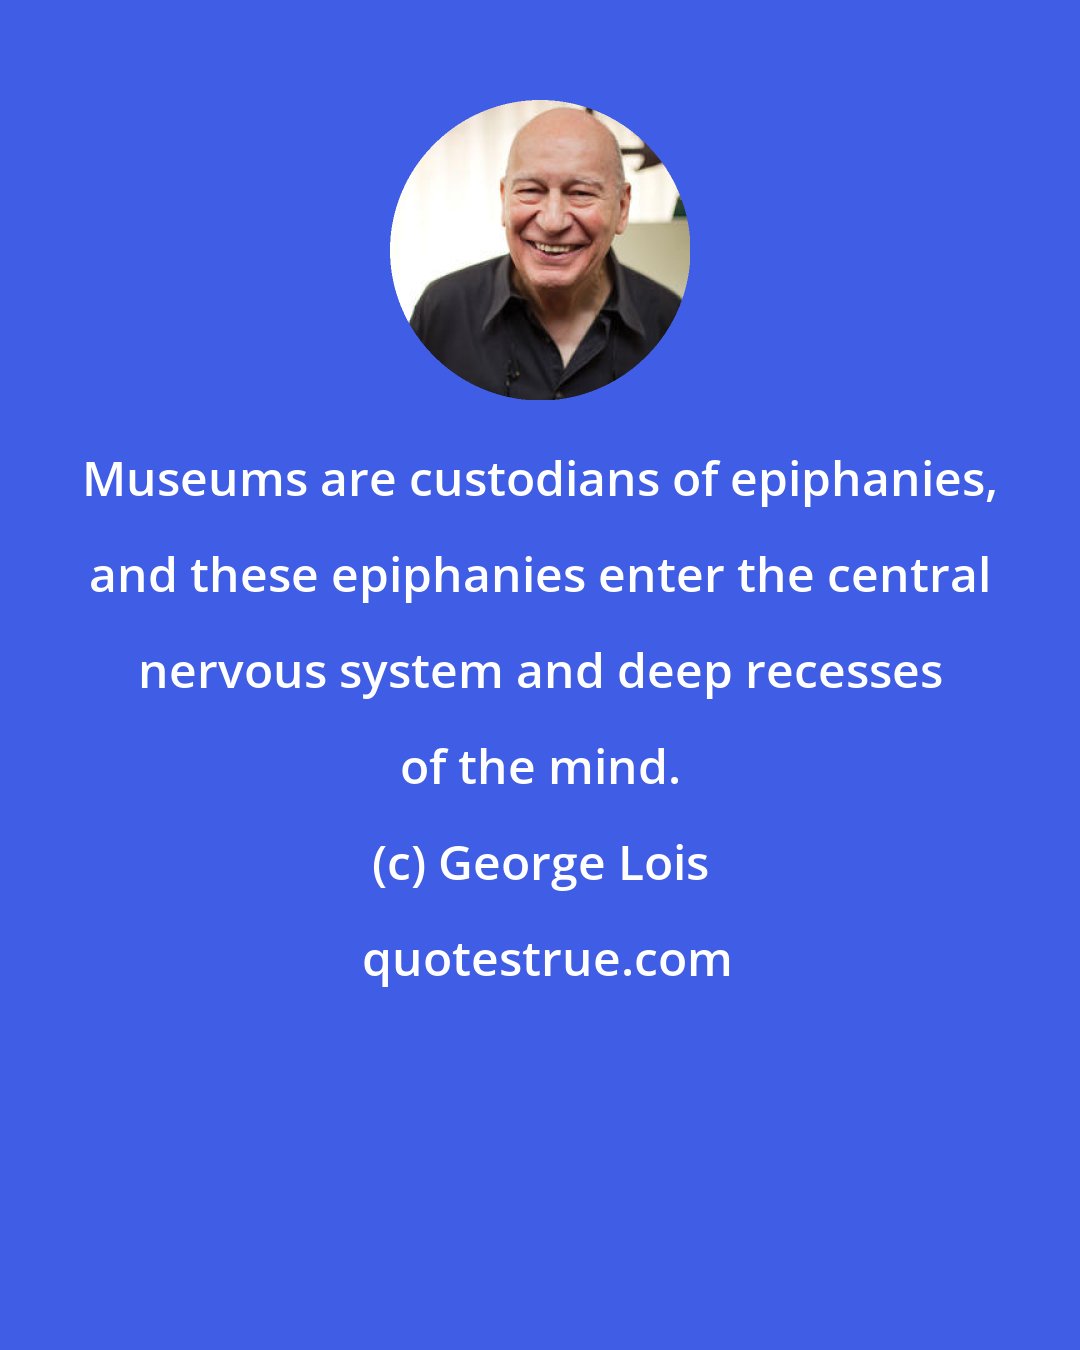 George Lois: Museums are custodians of epiphanies, and these epiphanies enter the central nervous system and deep recesses of the mind.